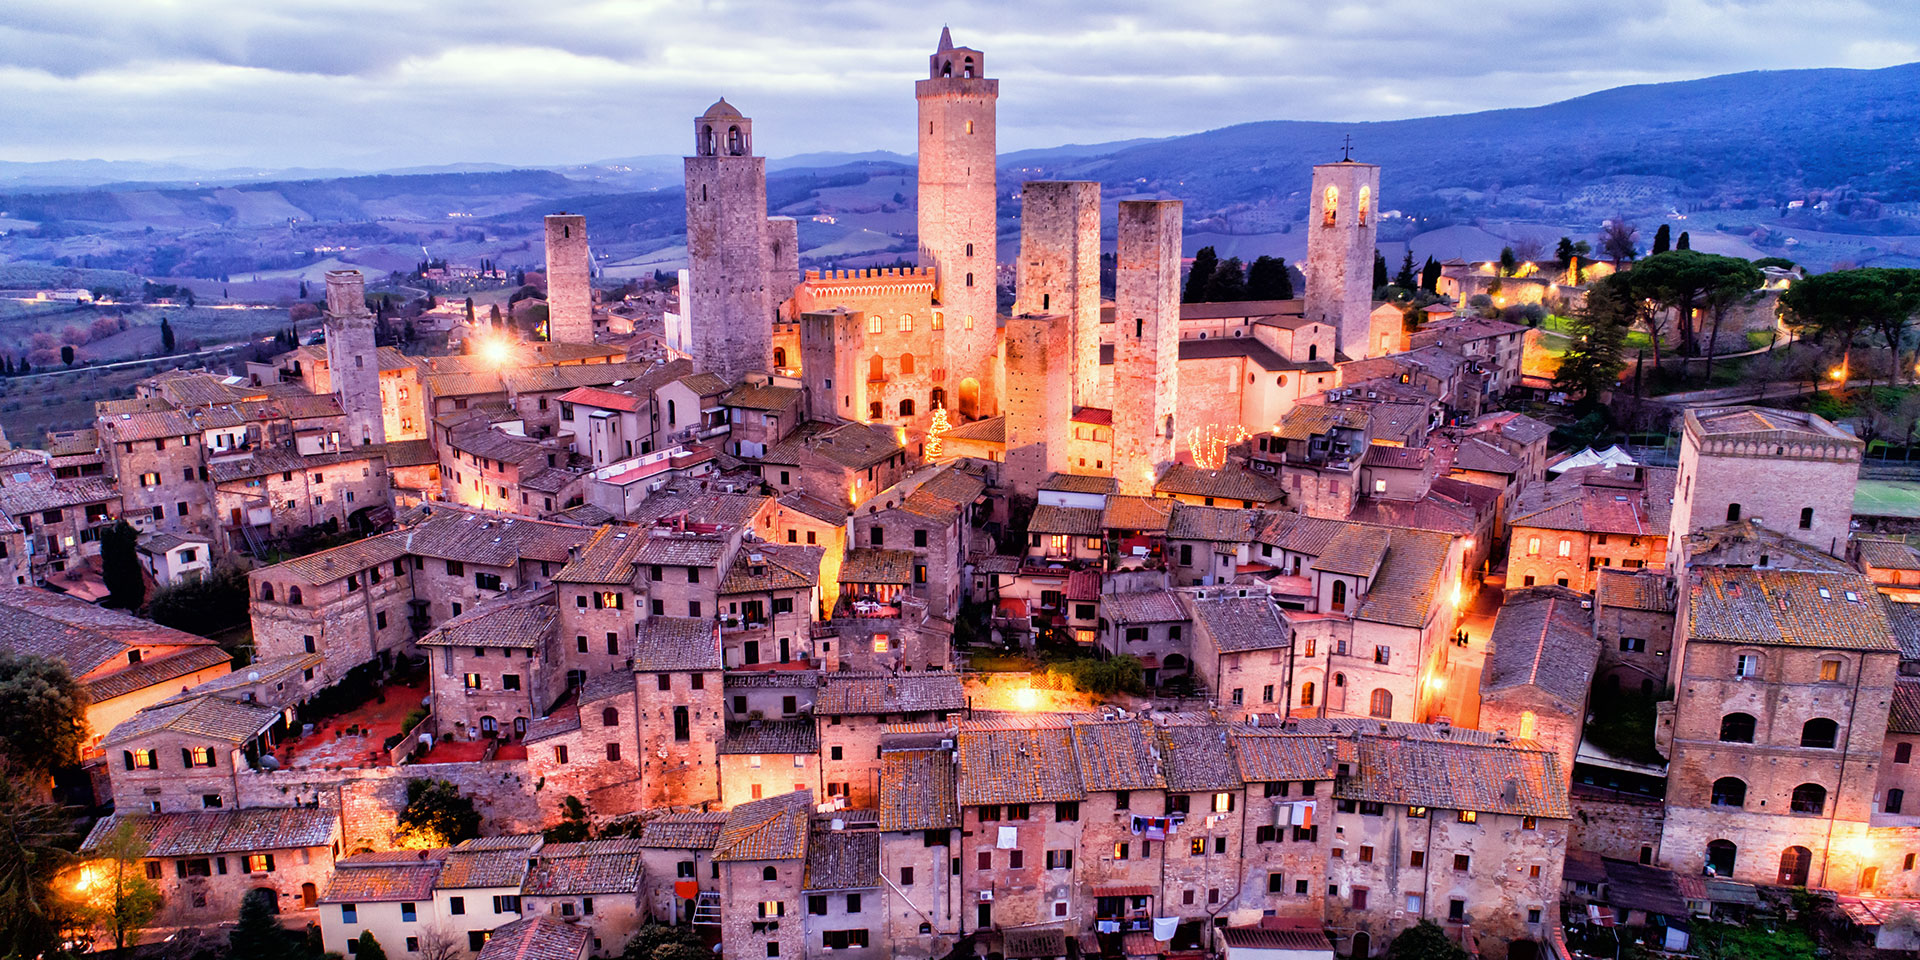 A stunning view of Tuscan Hill Towns